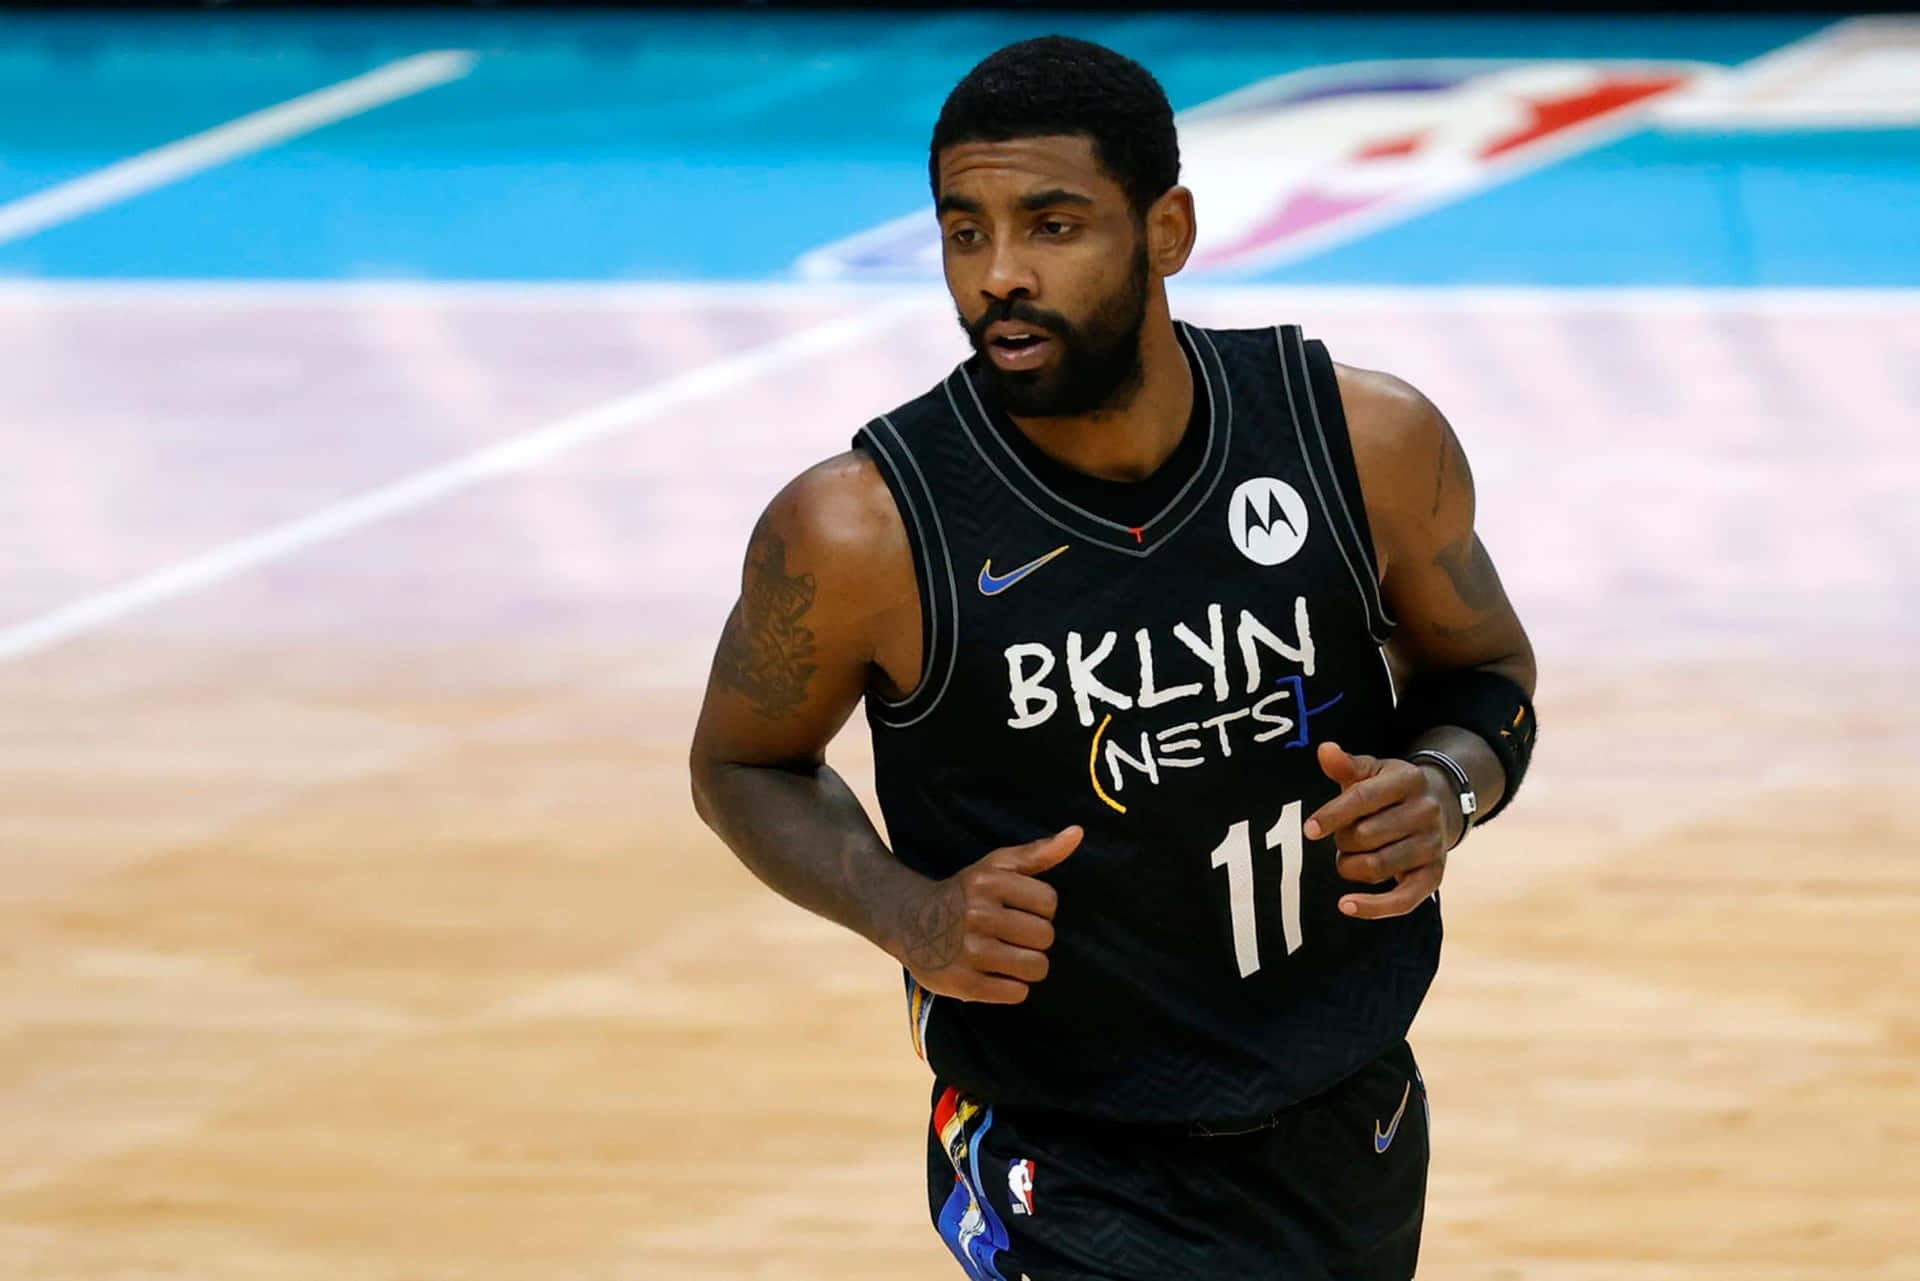 Kyrie Irving in his Brooklyn Nets kit Wallpaper